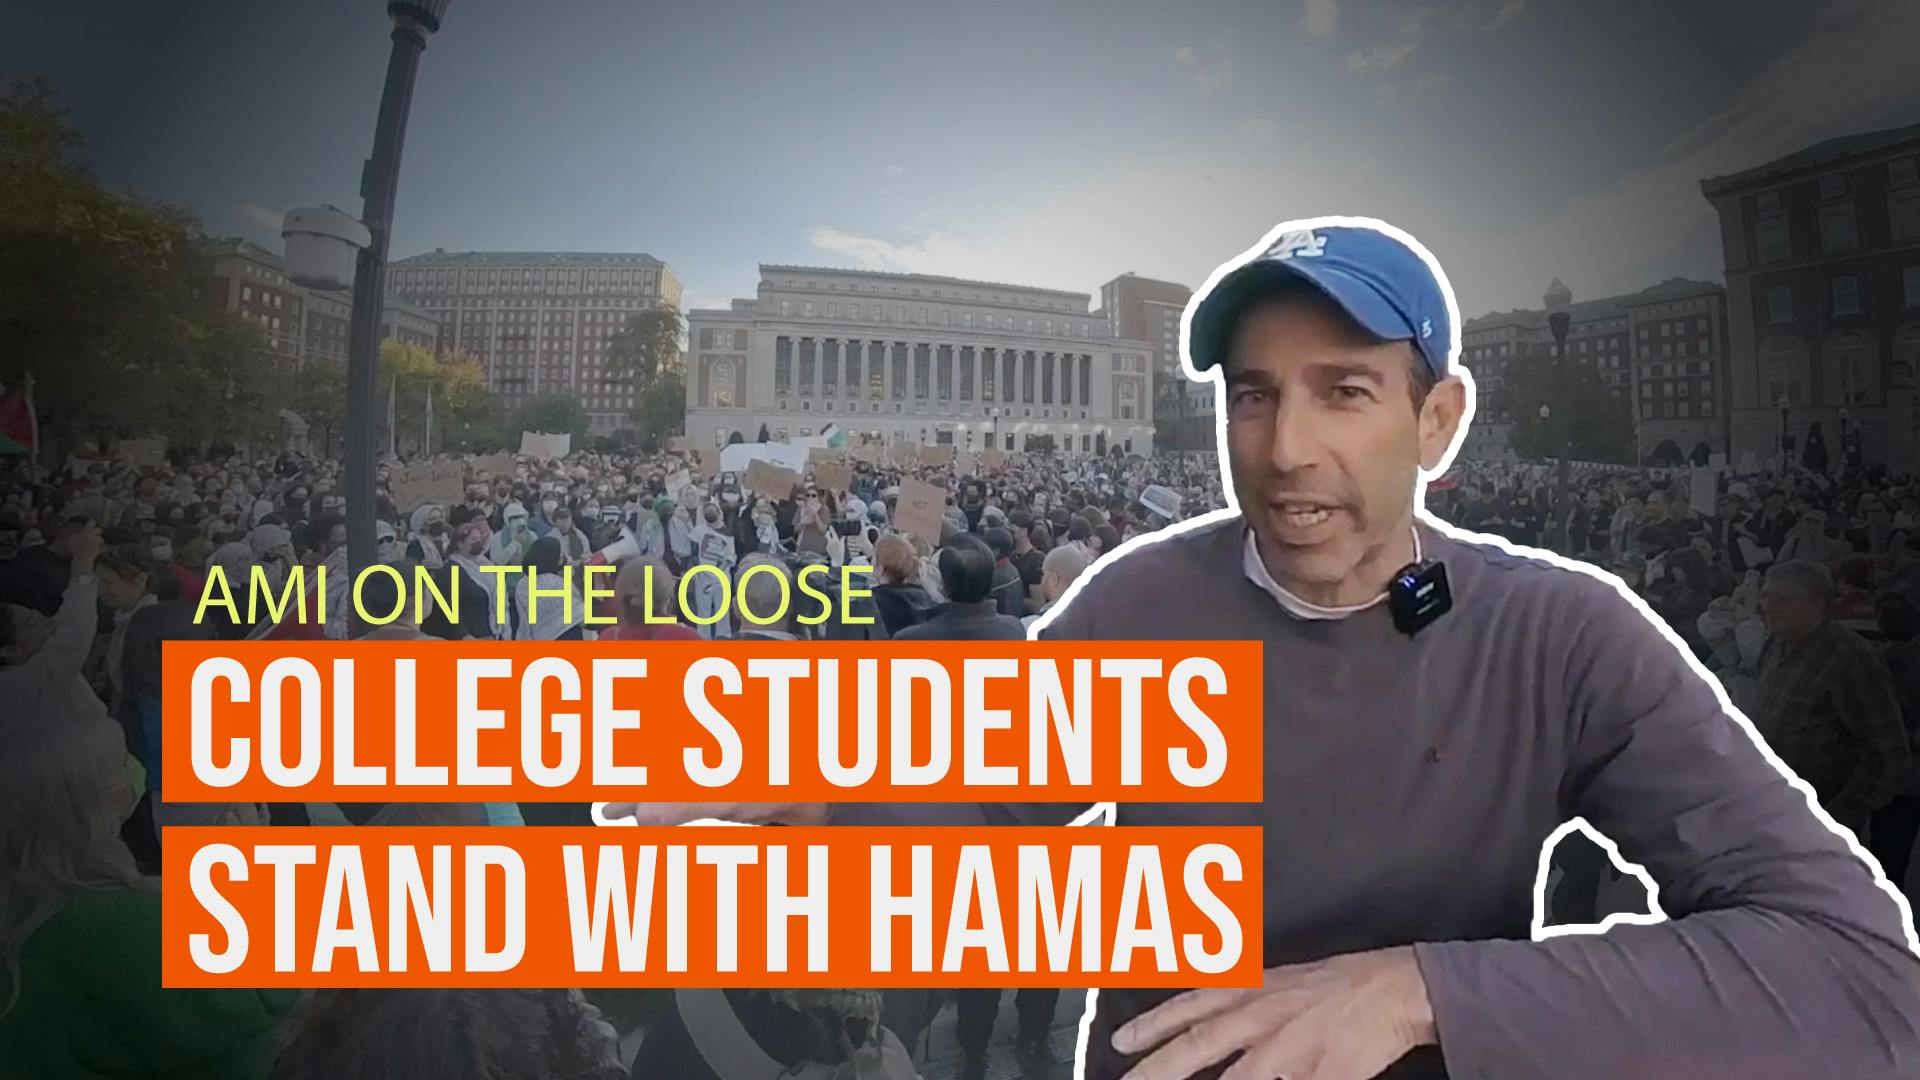 College Students Stand with Hamas